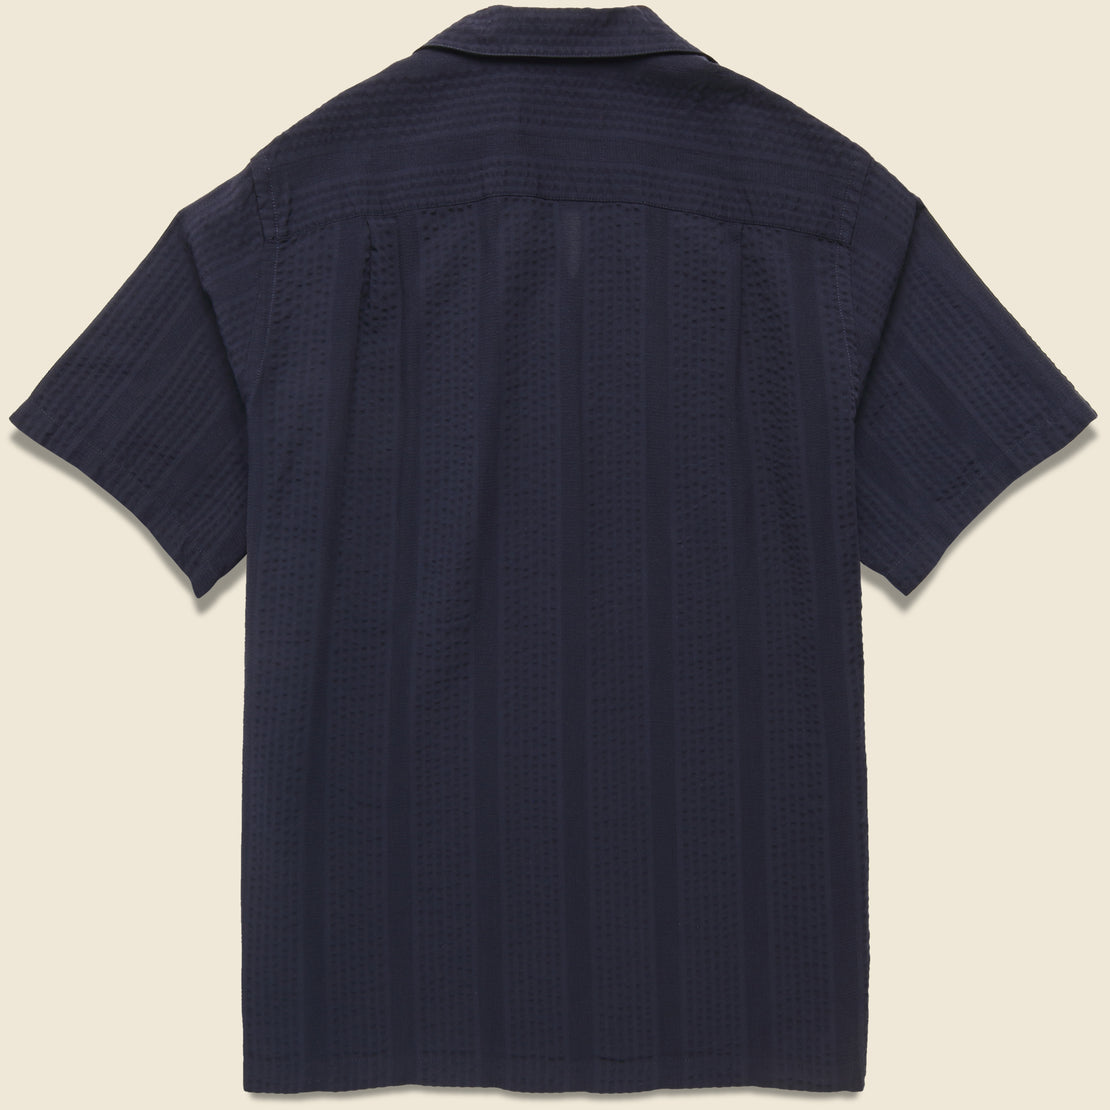 Praia Camp Shirt - Navy - Portuguese Flannel - STAG Provisions - Tops - S/S Woven - Seersucker